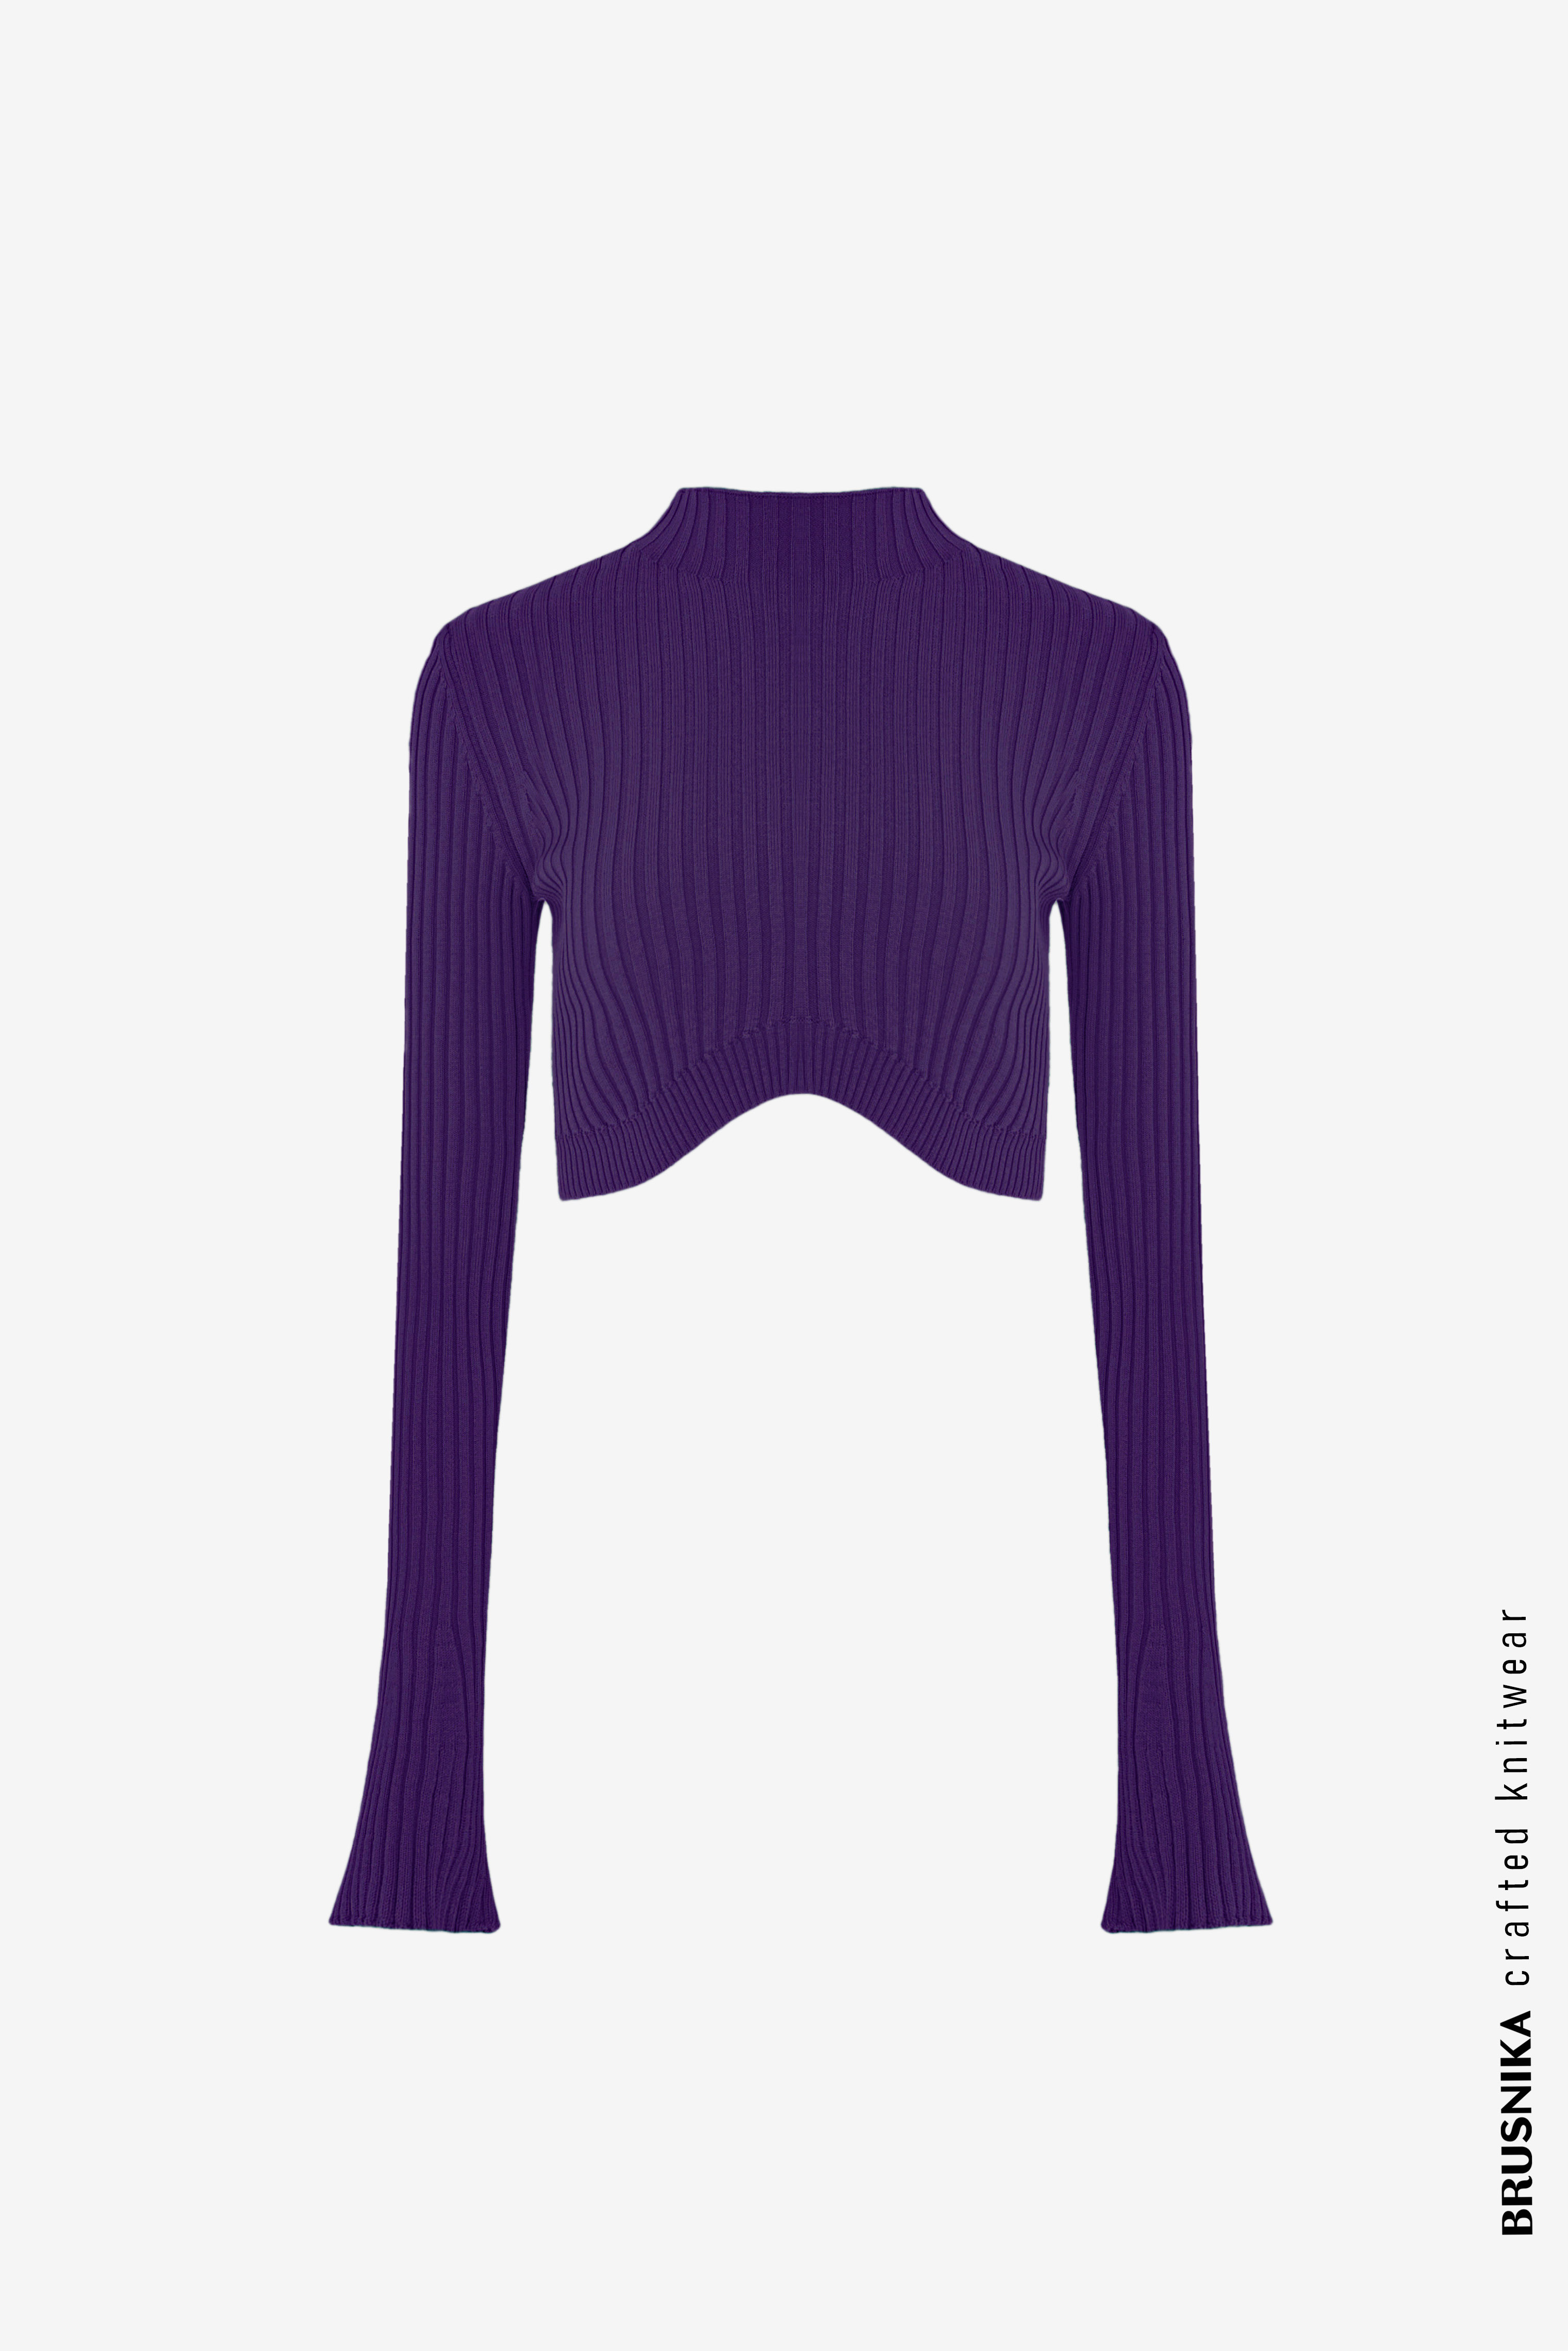 Pull-over 3332-33 Purple from BRUSNiKA